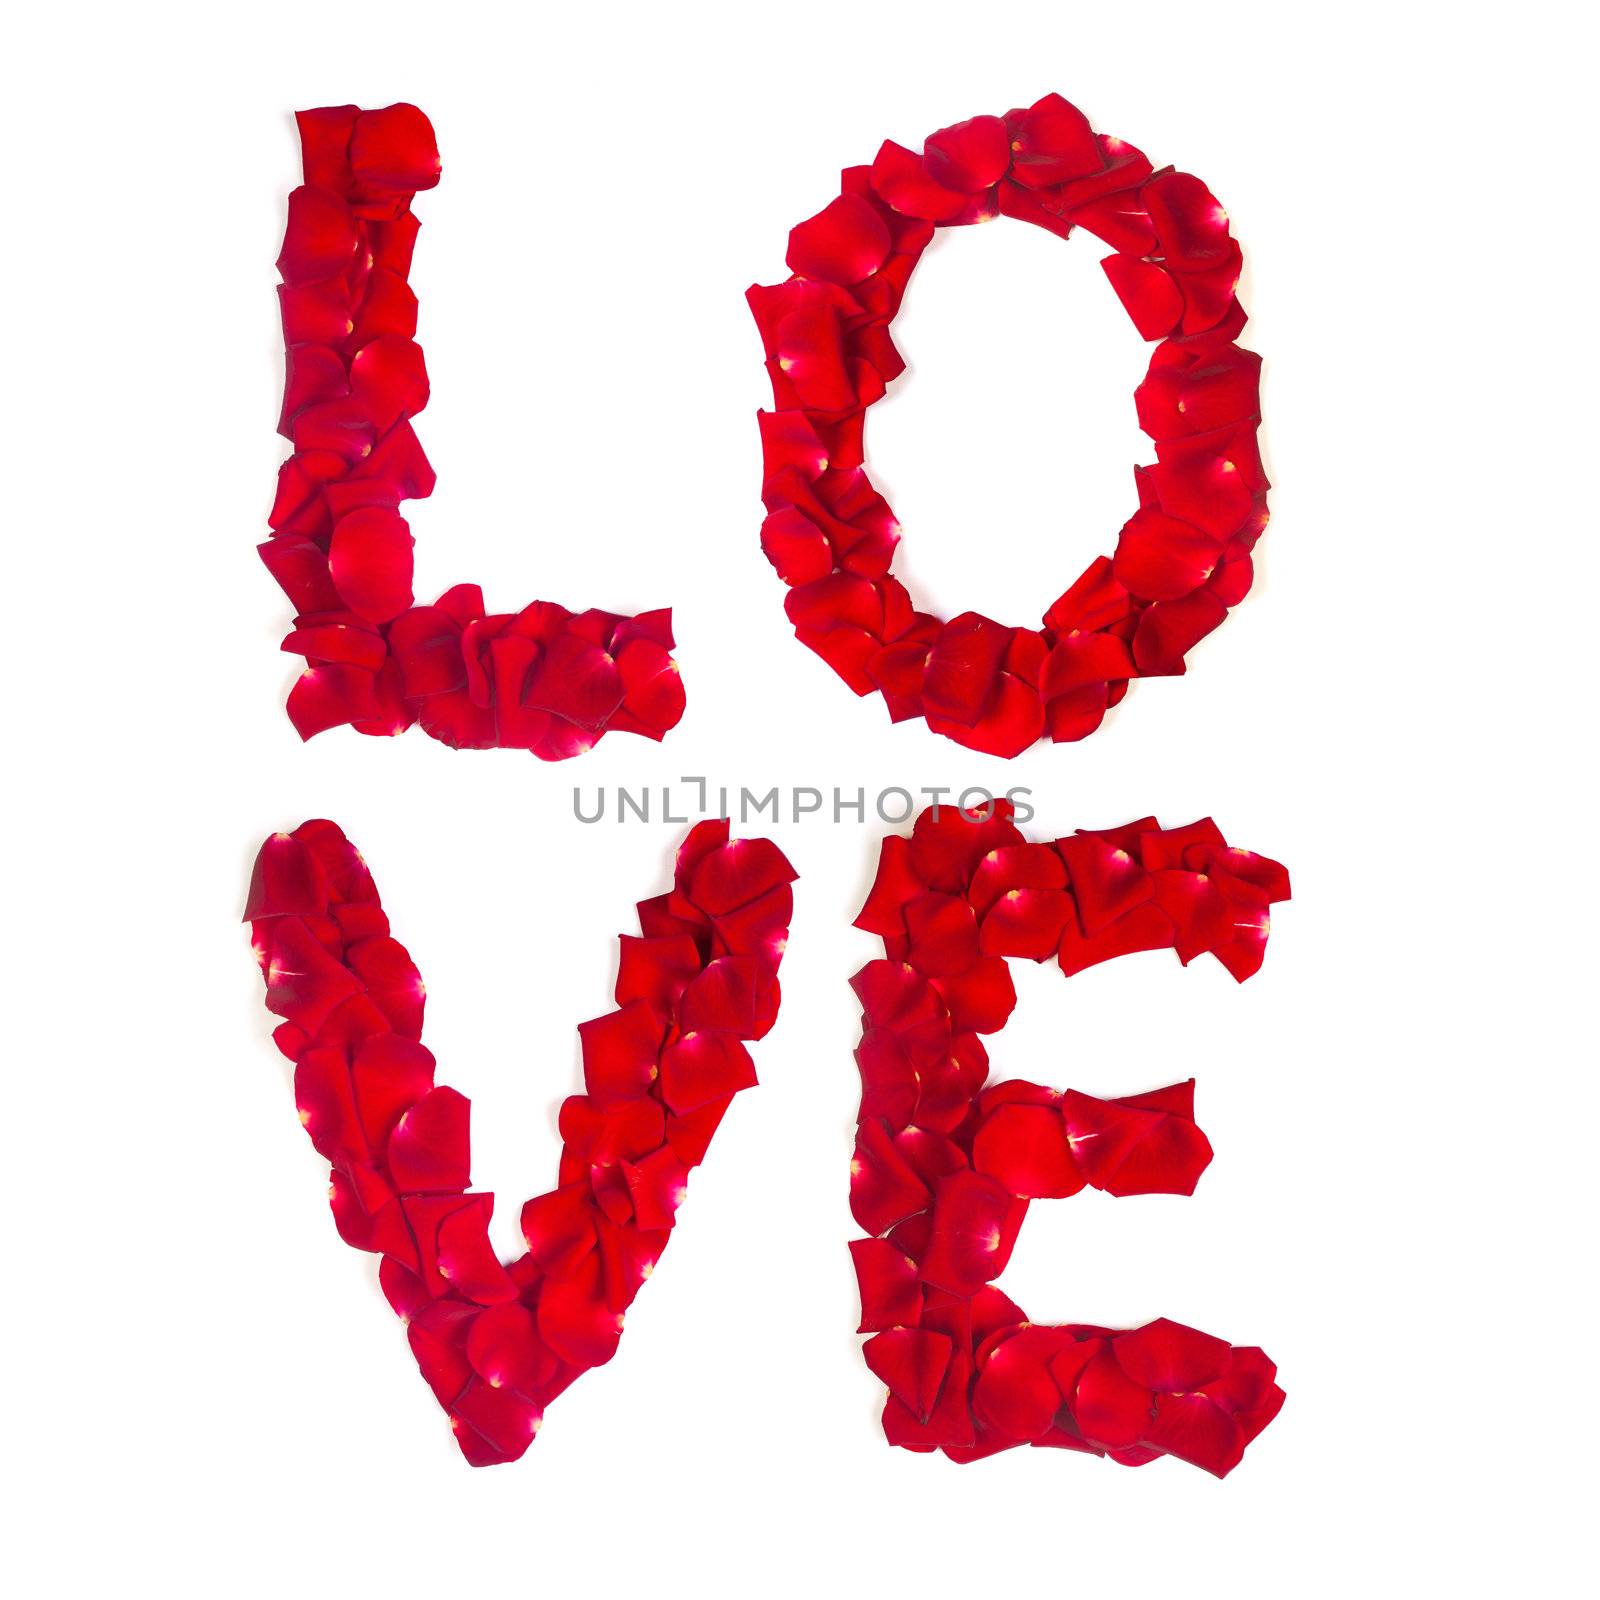 Red rose petals set in word LOVE isolated on white background